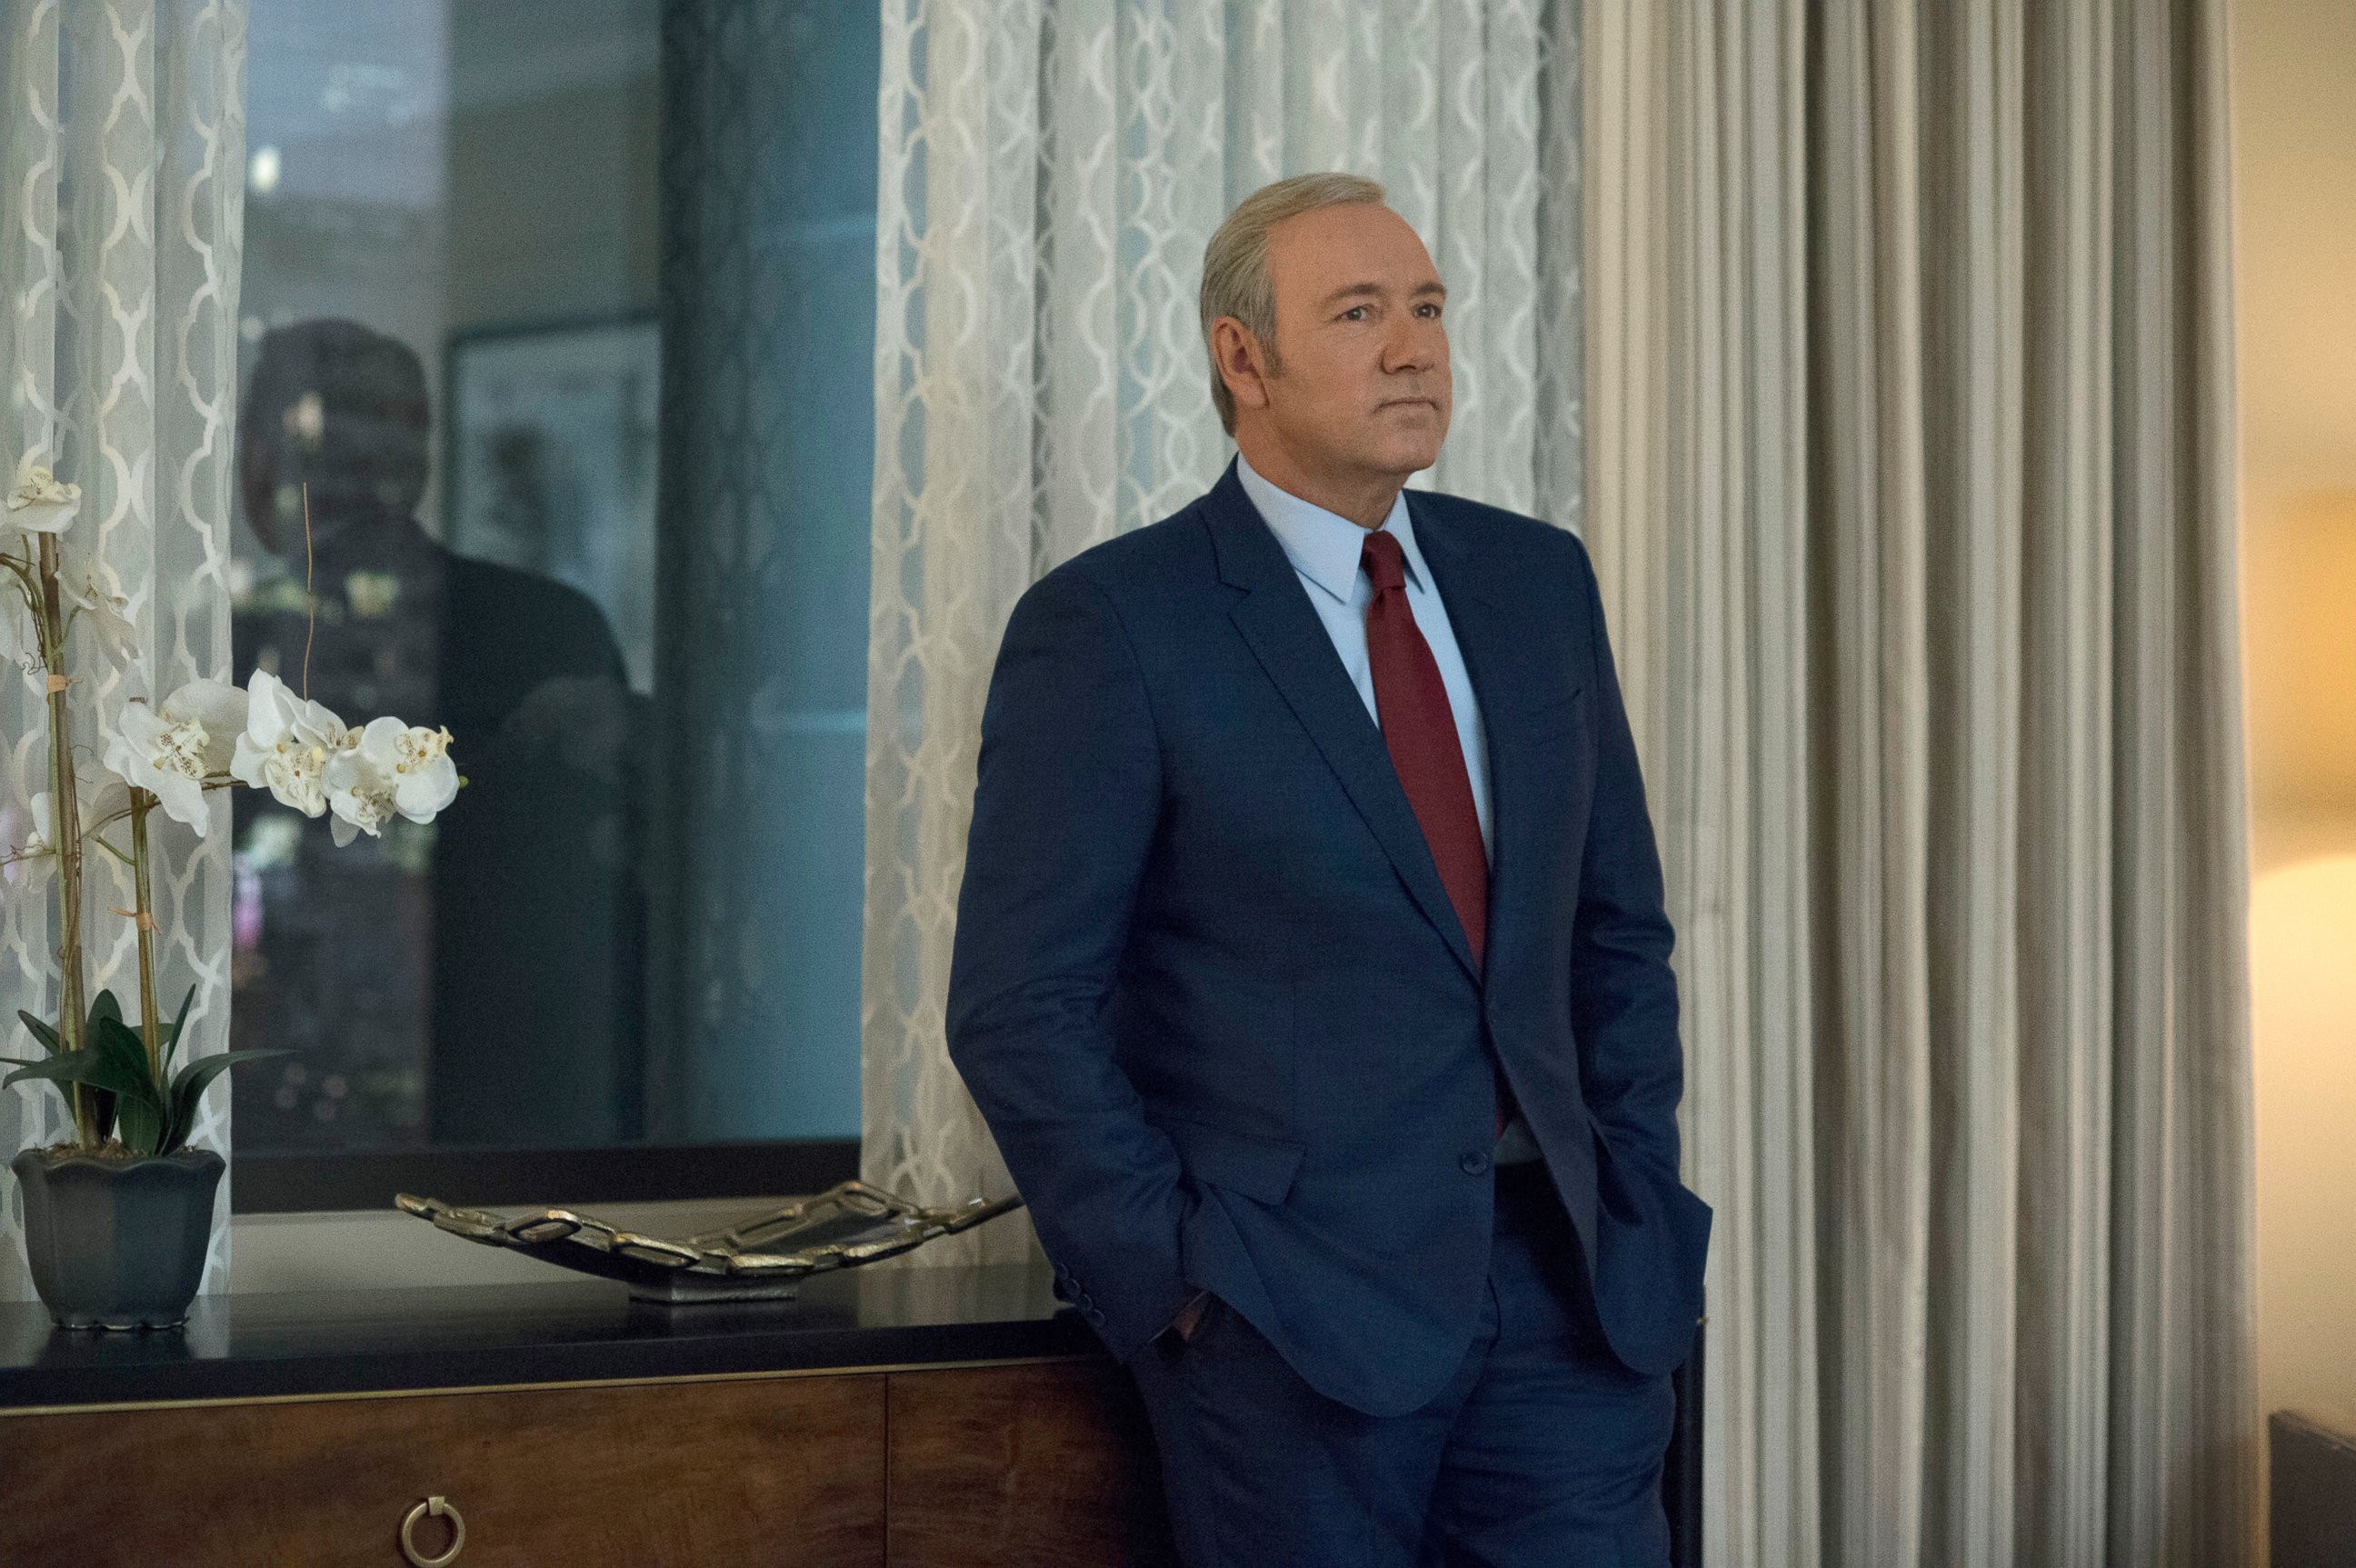 PHOTO: Kevin Spacey in a scene from season 4 of "House of Cards."